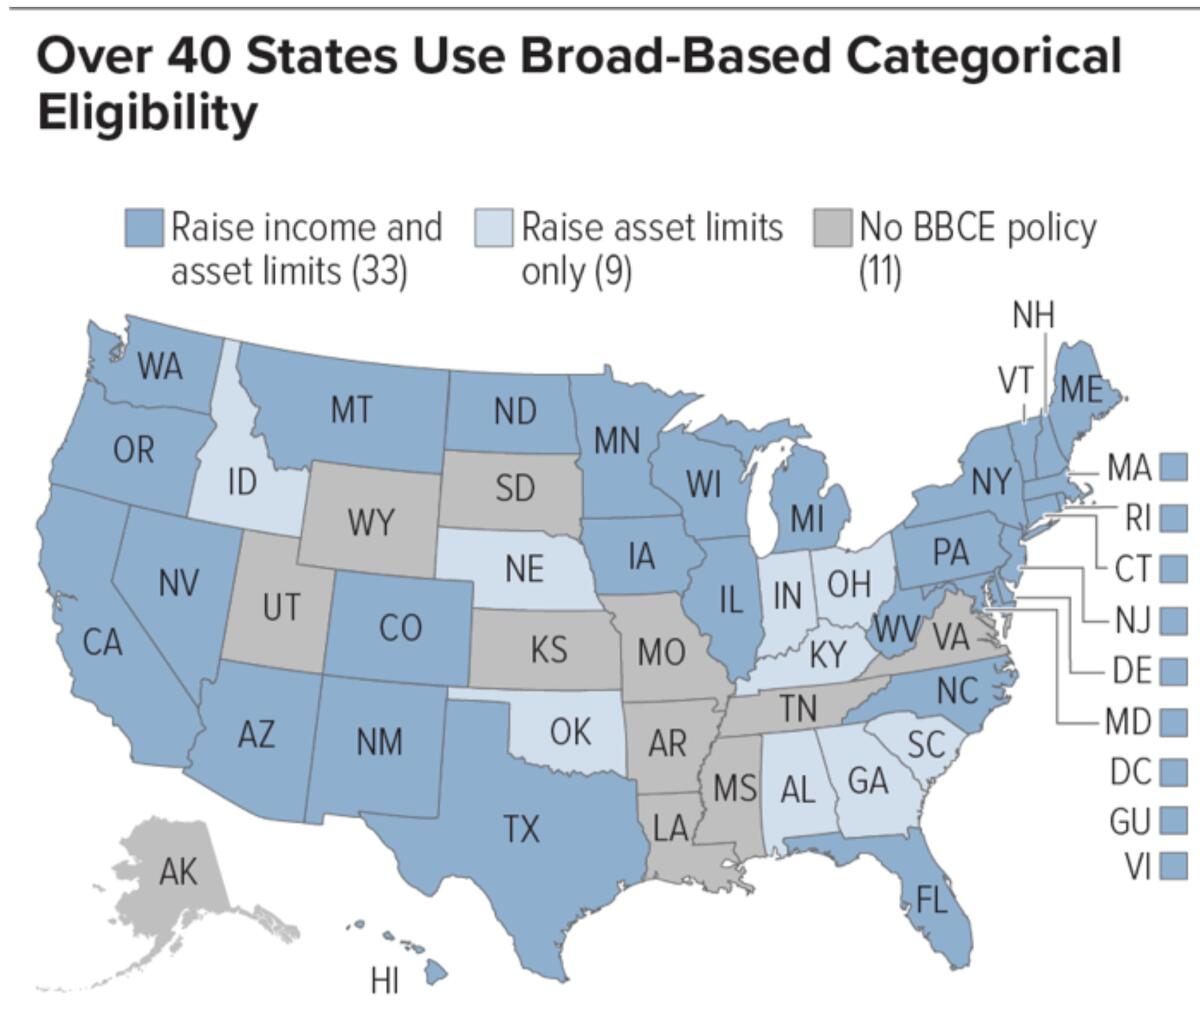 More than 40 states use broad-based categorical eligibility to raise income and asset limits to expand food stamp eligibility. Trump wants to kill the option.